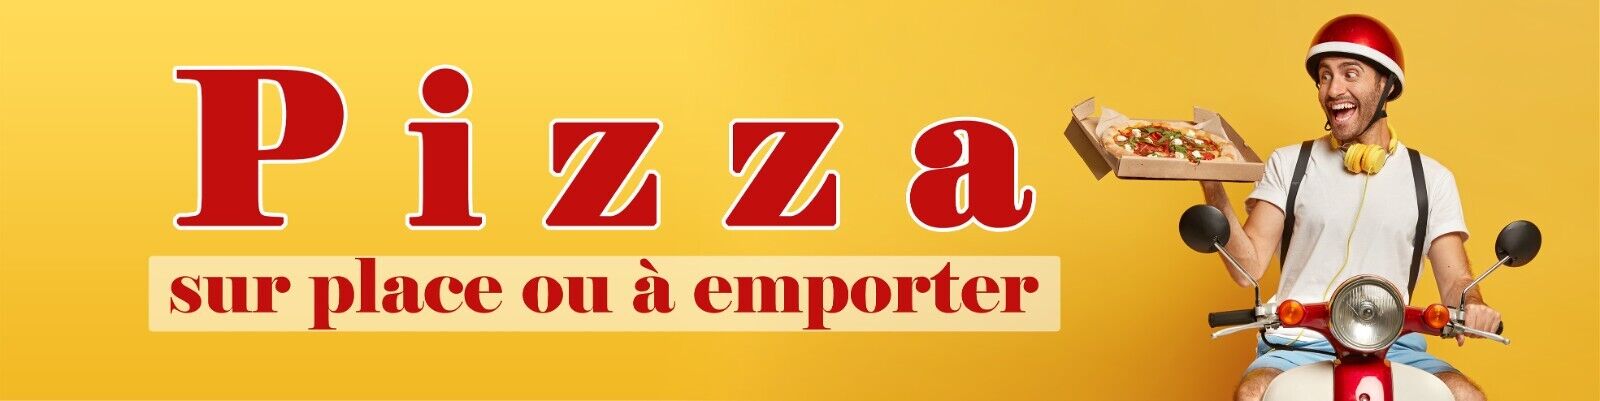 Tacos Pizzeria Snack Restaurant Banners 10 Models Available